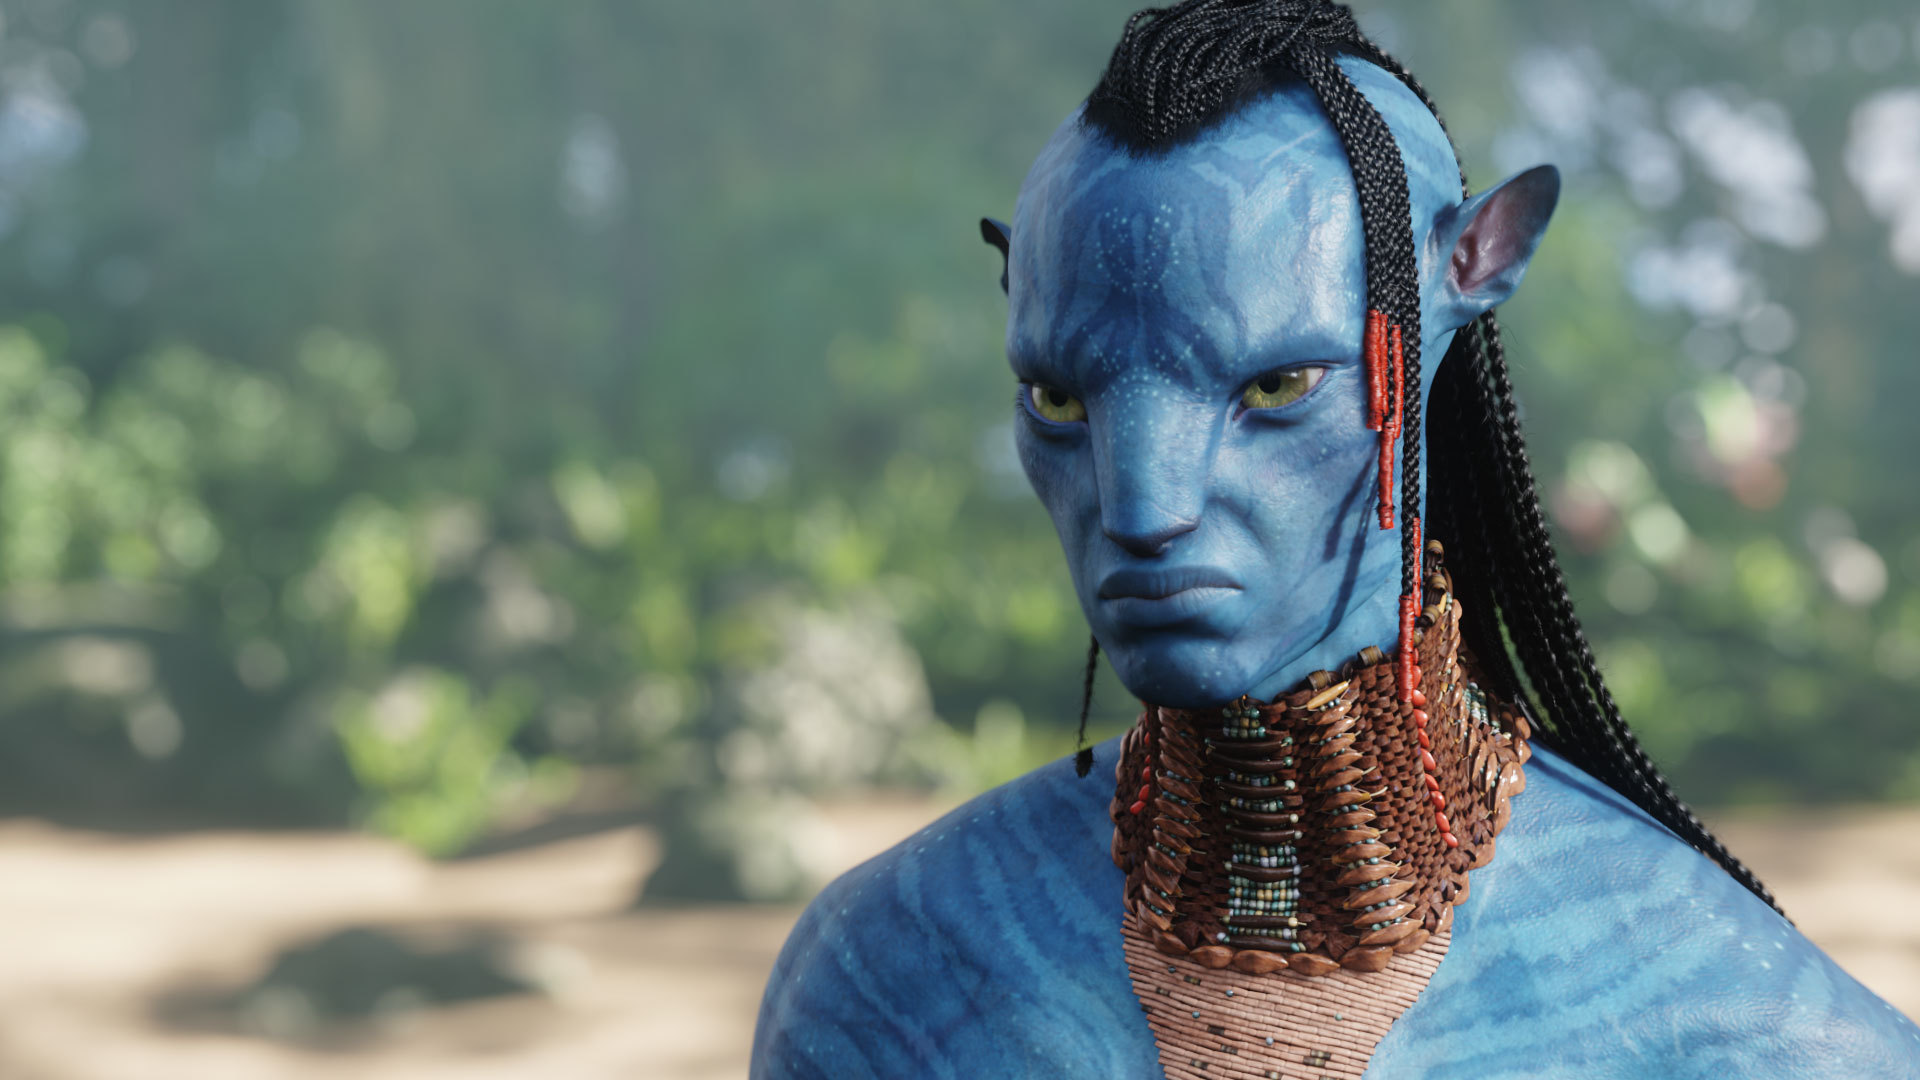 2. Avatar (2009) and Avatar 2: The Way of Water (2022) - Amazing 3D Spectacle